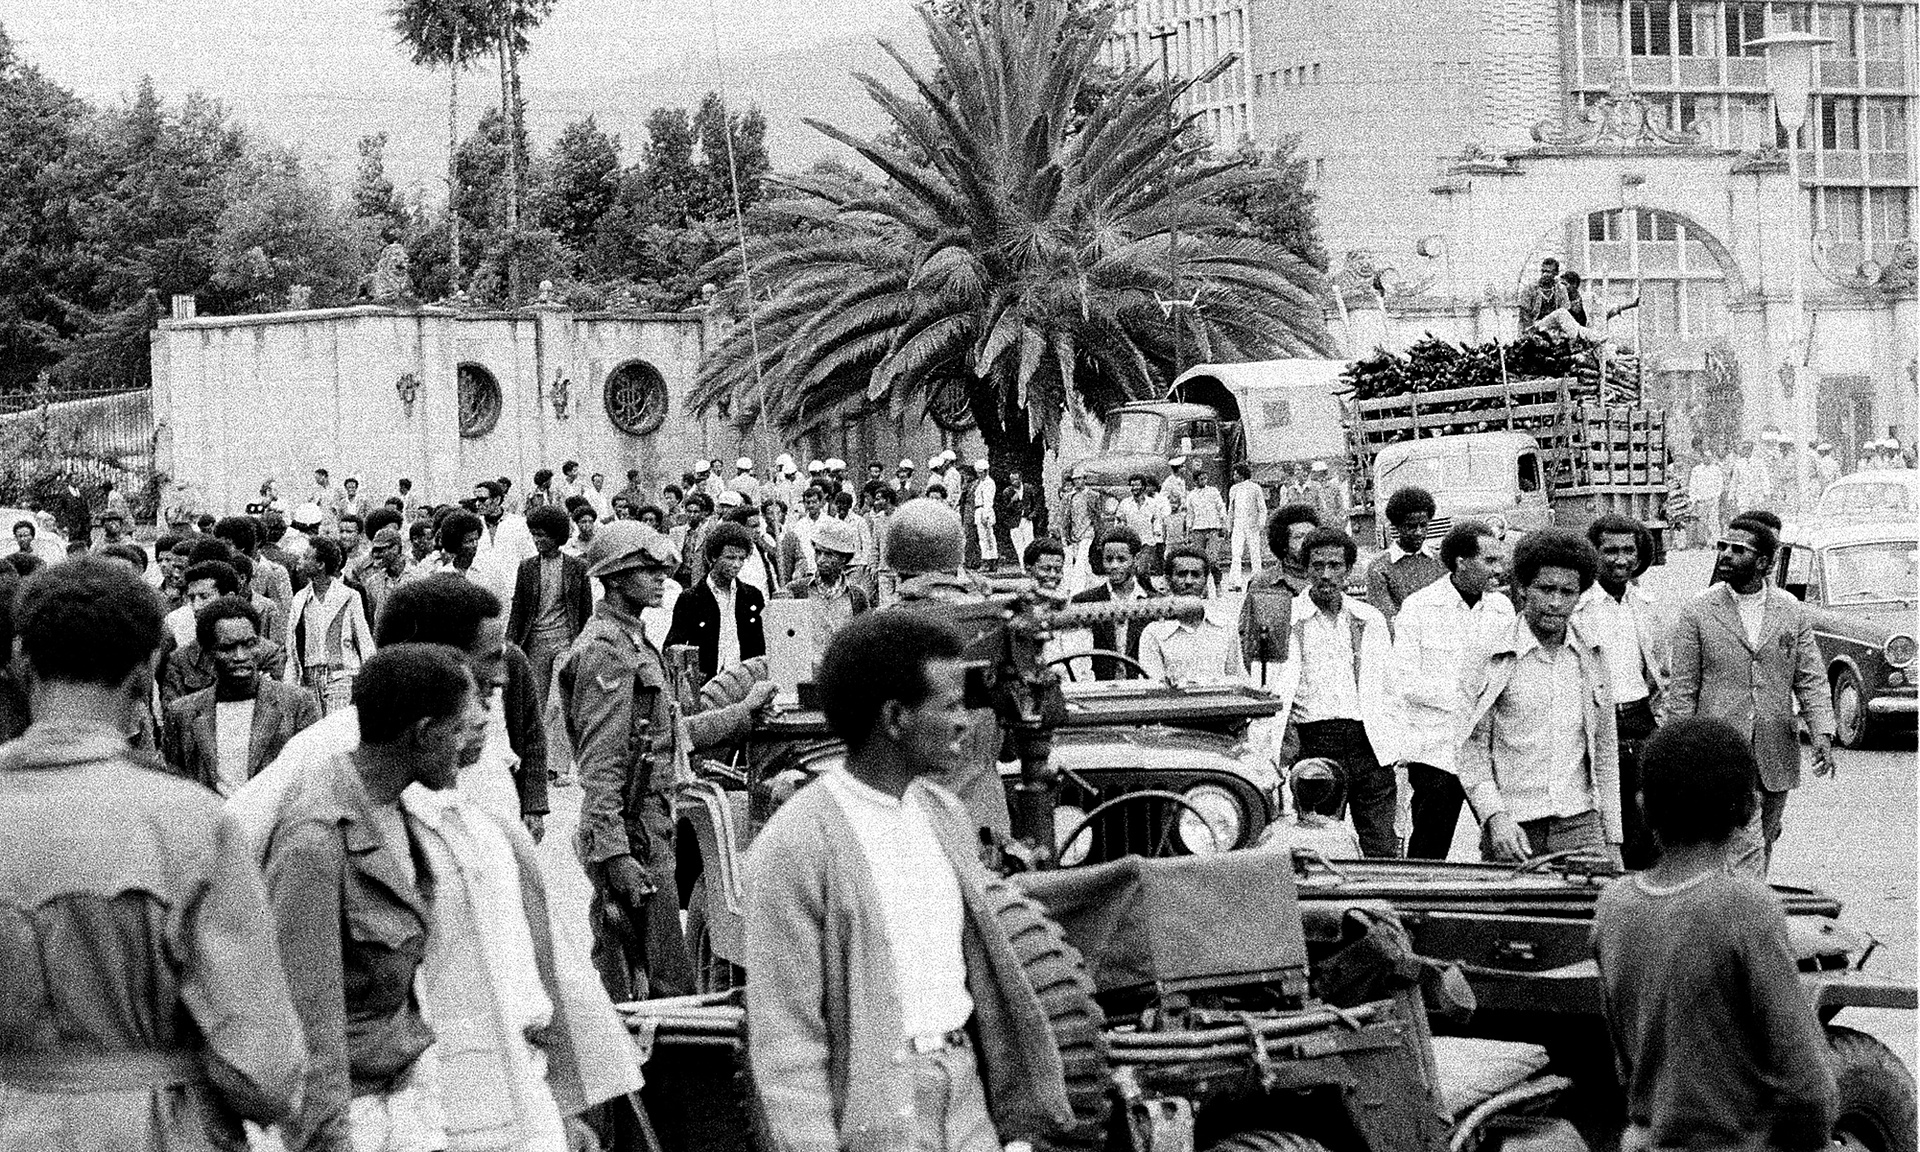 Students-protest-in-Addis-Ababa-Ethiopia-September-17-1974-against-the-military-committee-that-seized-political-power-last-week..jpg